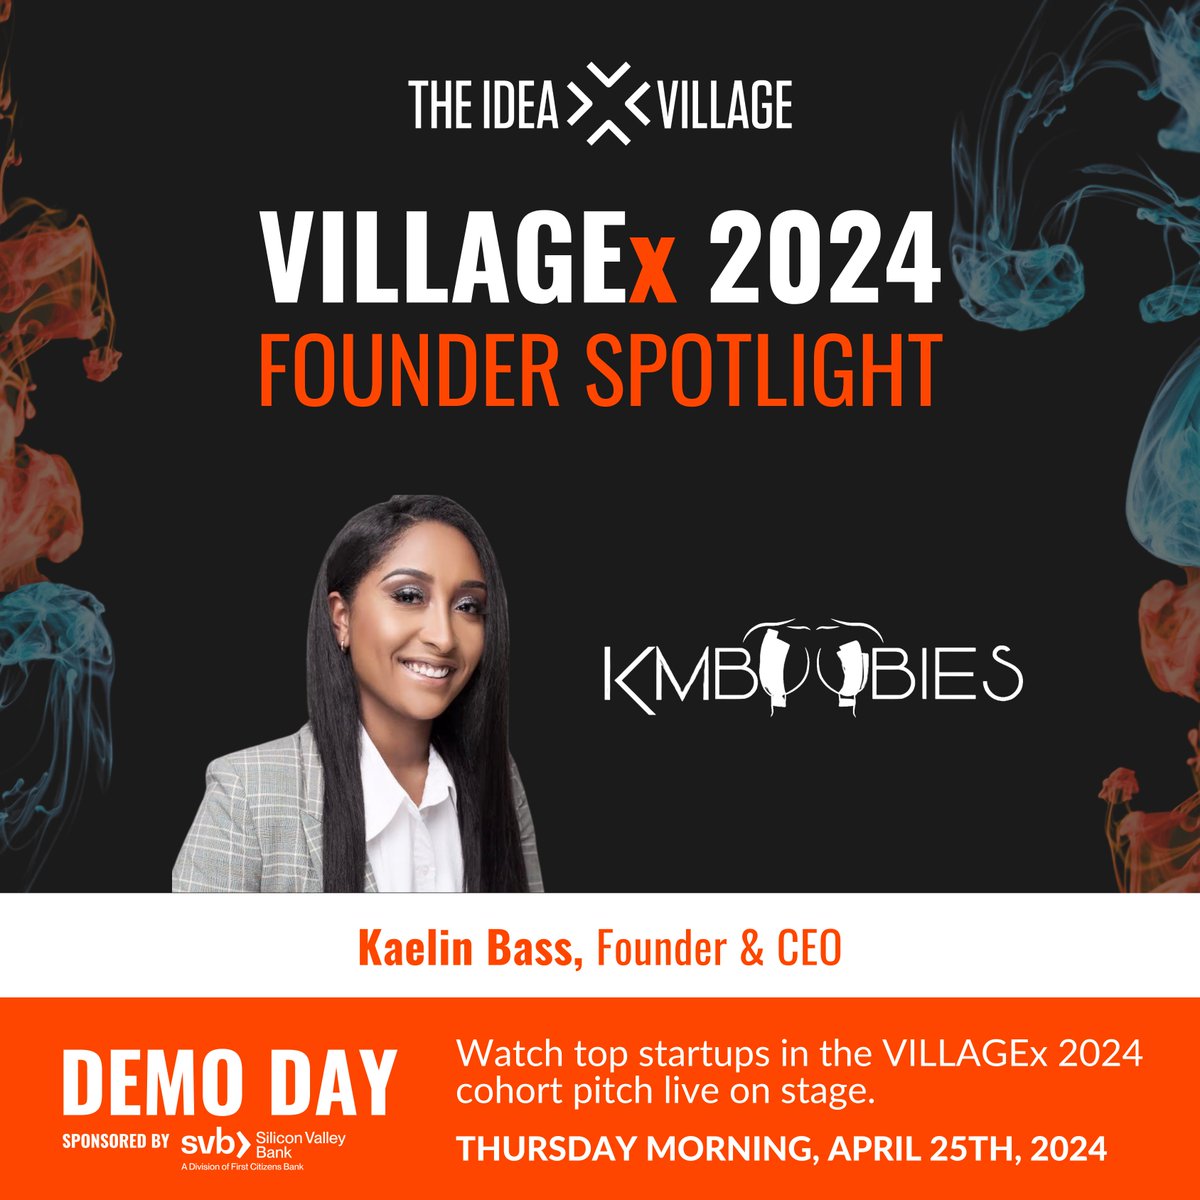 Meet Kaelin Bass, Founder & CEO of KMBOOBIES, empowering women with boob tape for non-surgical breast lifts, boosting confidence and eliminating insecurities! Learn more and join us at Demo Day 2024, sponsored by Silicon Valley Bank! ideavillage.org/demoday2024 #VILLAGEx2024